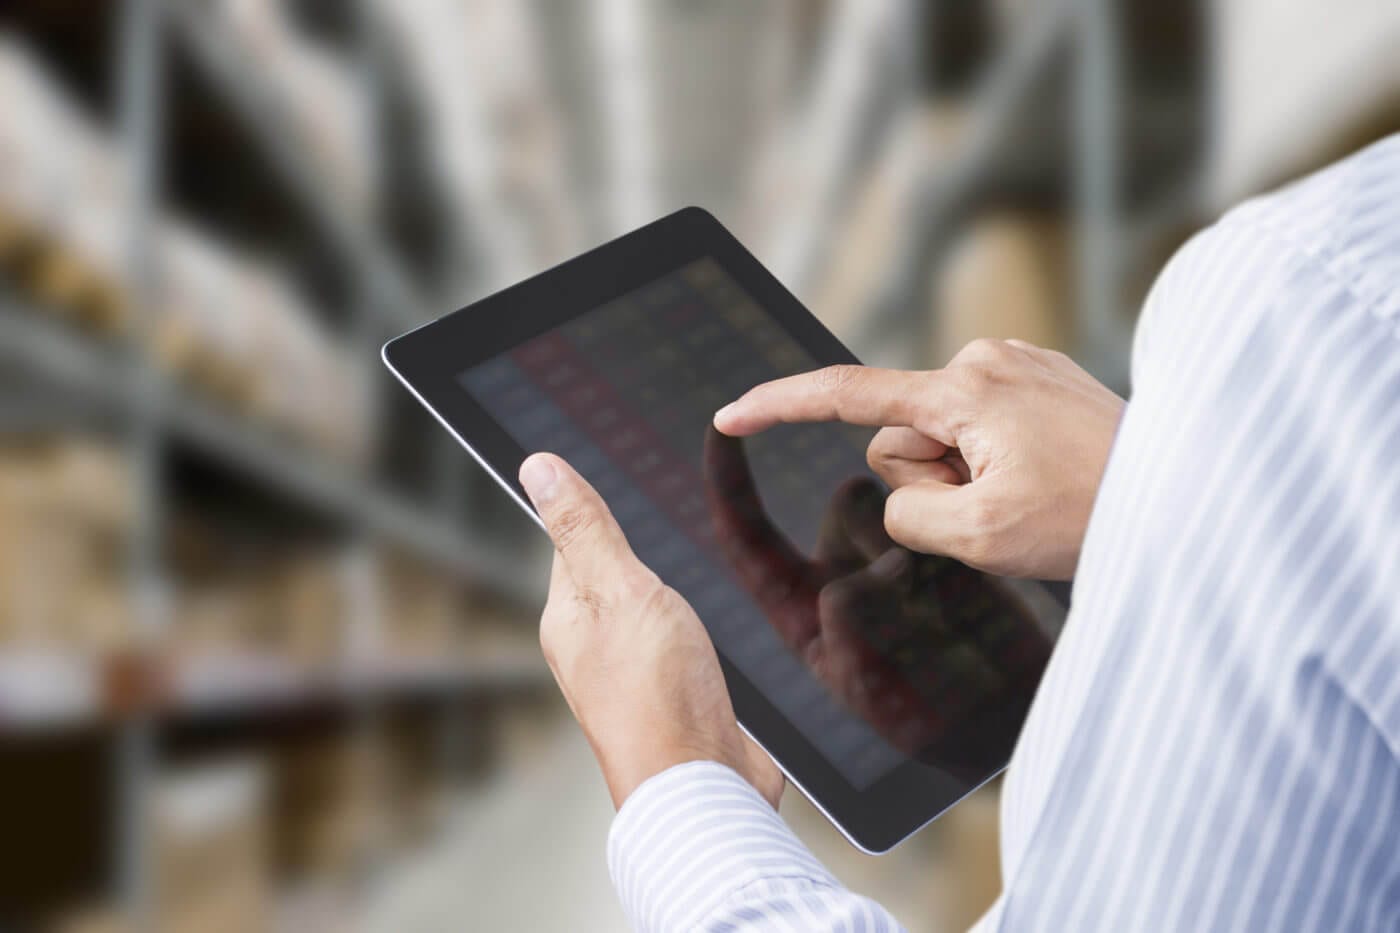 Warehousing with Vendor Managed Inventories